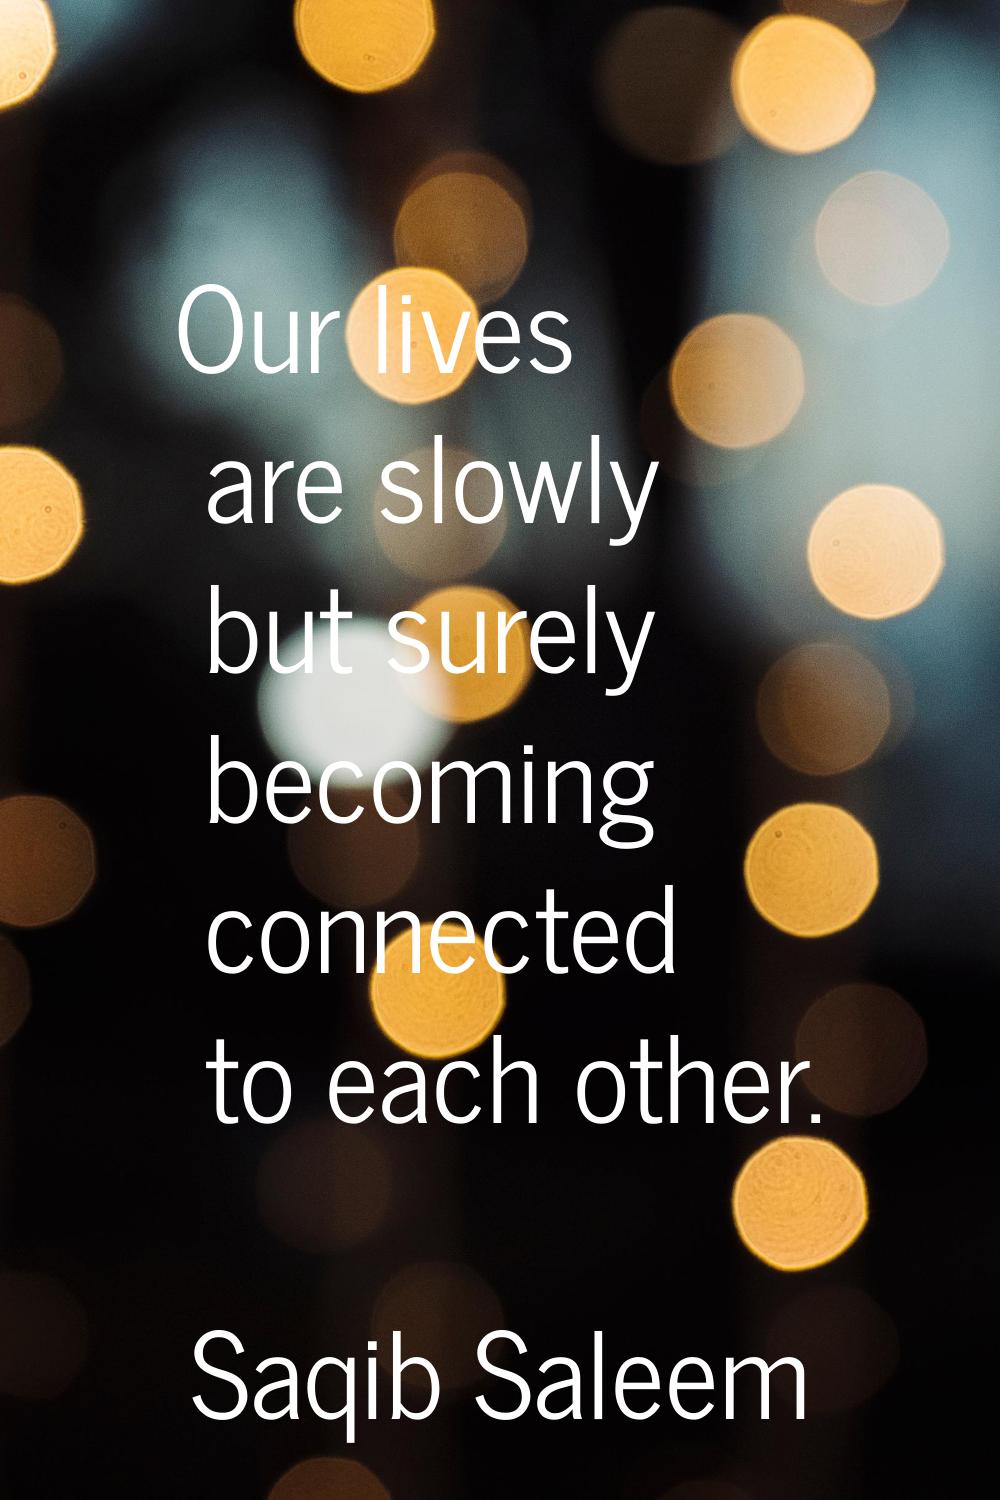 Our lives are slowly but surely becoming connected to each other.